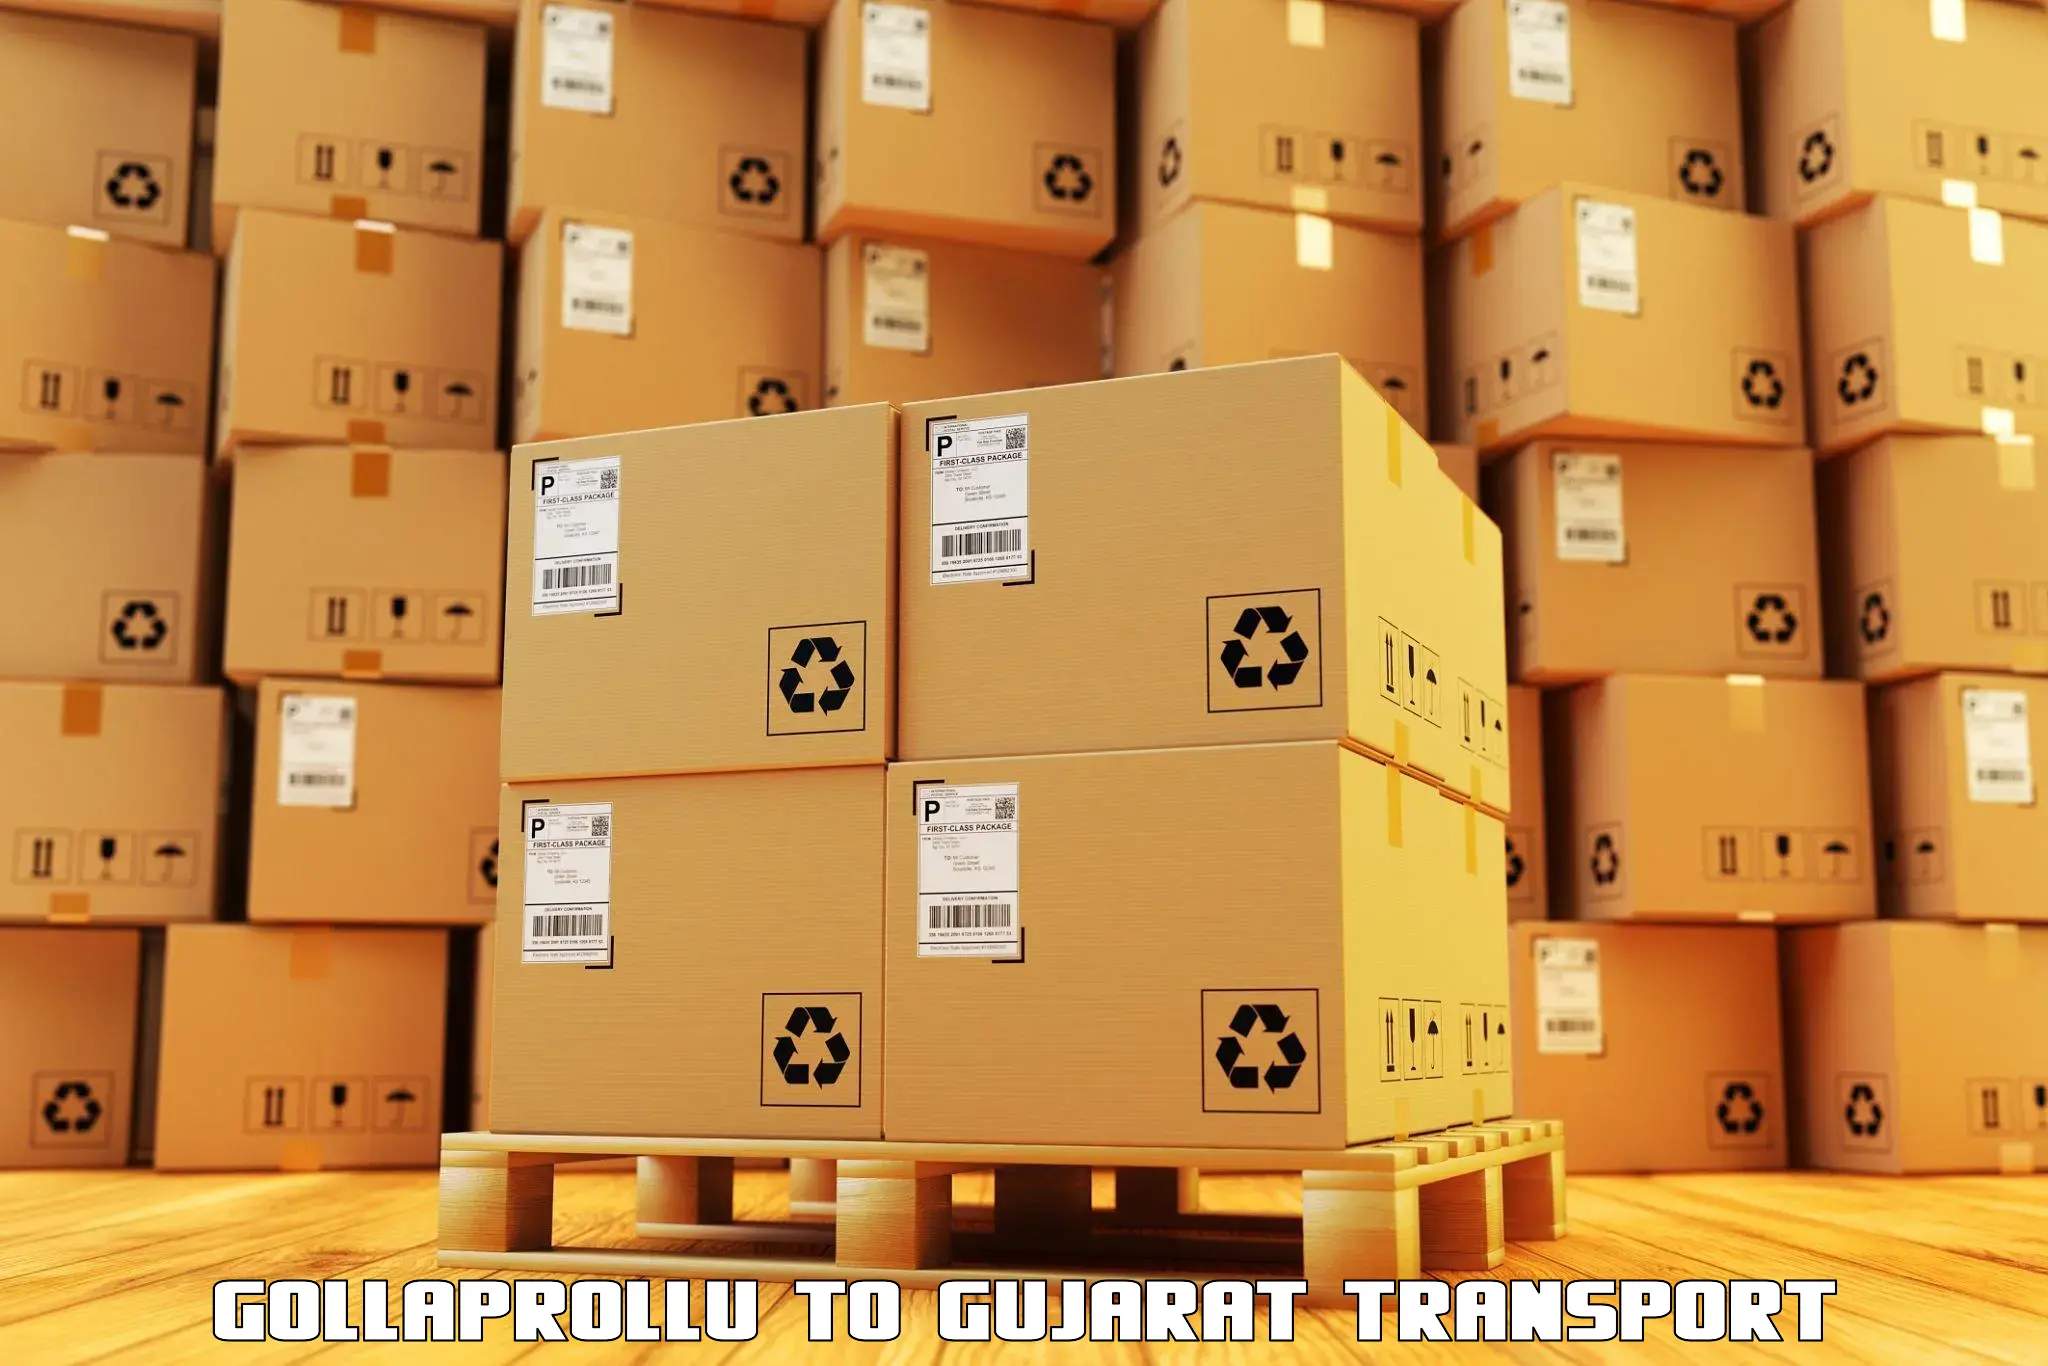 Daily transport service Gollaprollu to Surat